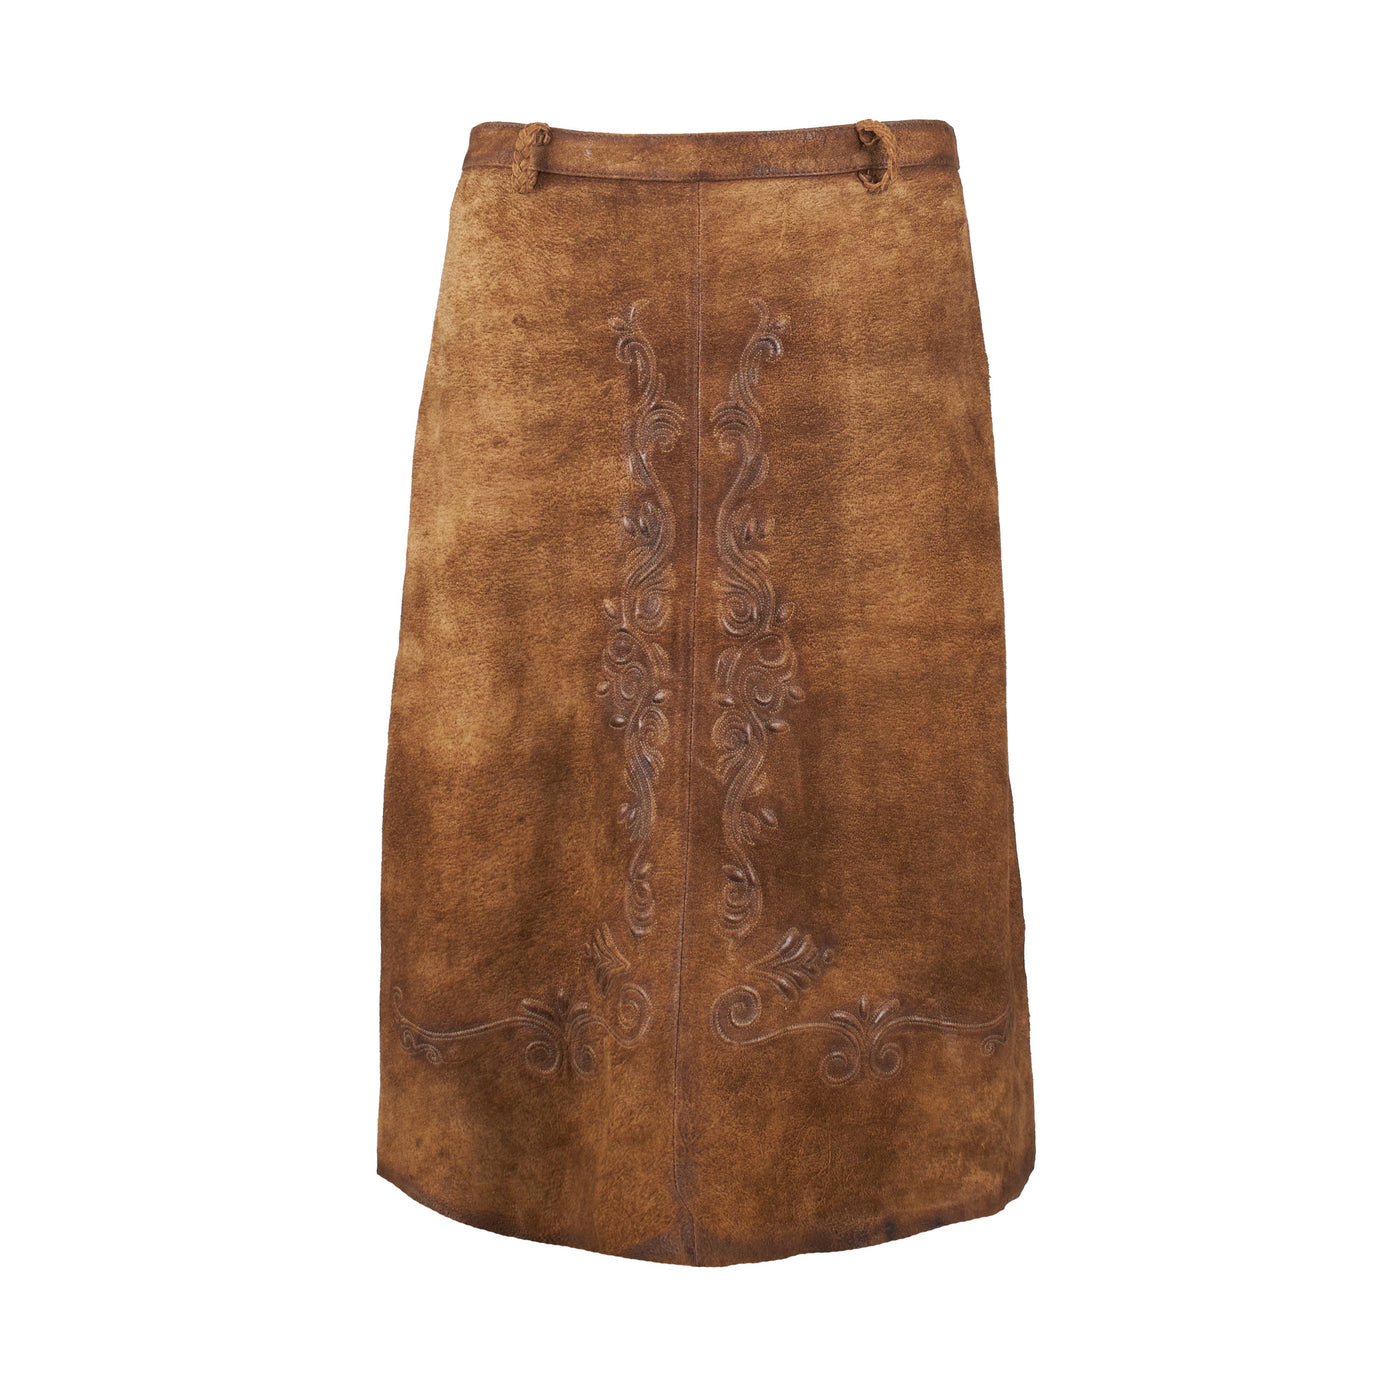 Secondhand Alm Sach Suede Leather Skirt